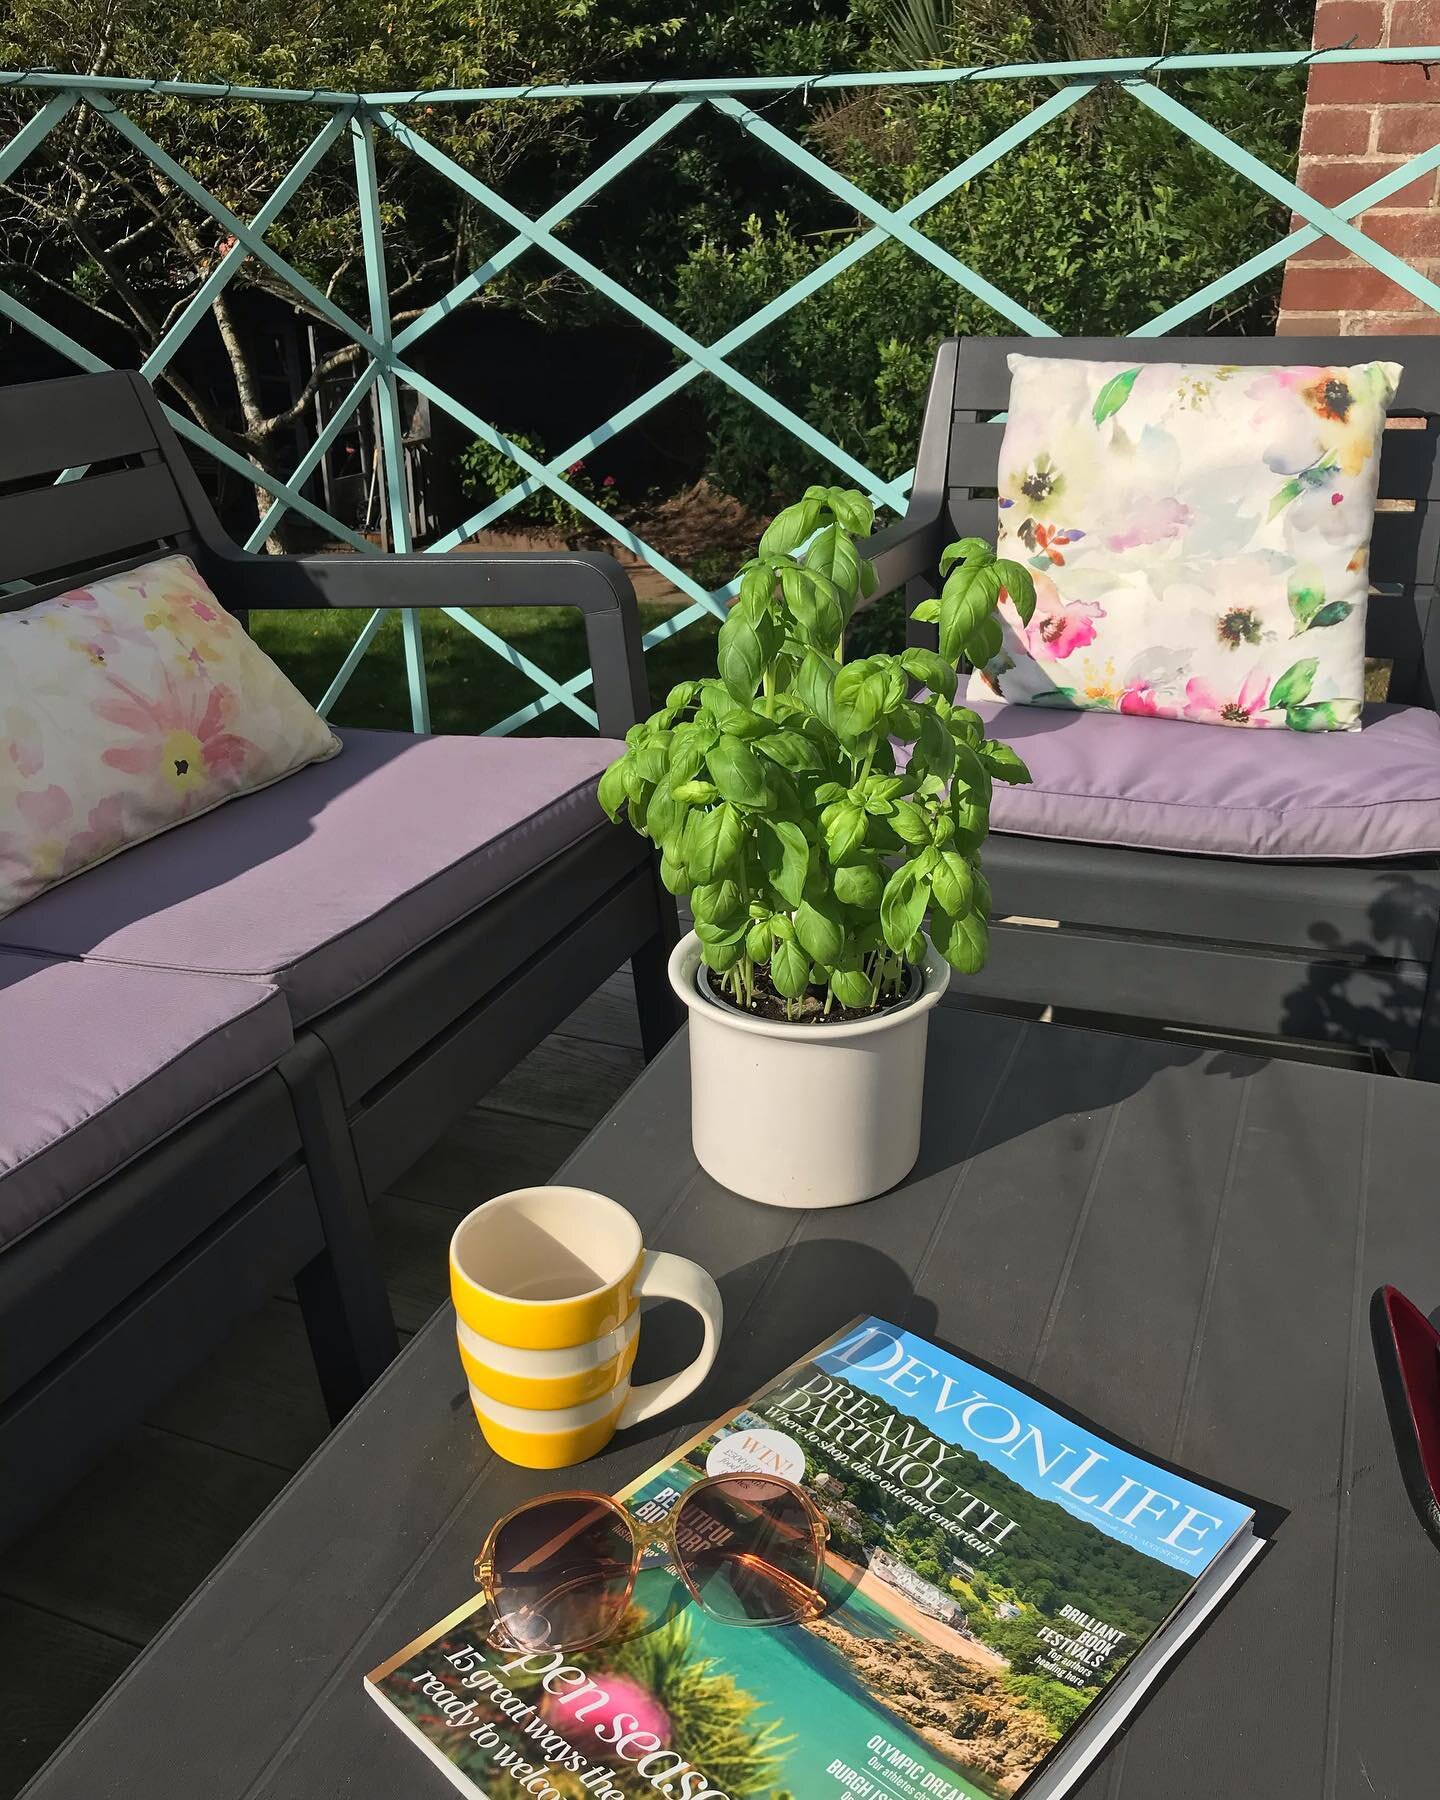 Waking up to a sunny, sunny morning in Devon. My favourite time of day for a cuppa &amp; a read on the terrace  @devonlifemag @devonlifeed #saturdaymorning #weekendvibes #morningcuppa #magazinereading #devonlife #exeter #devon